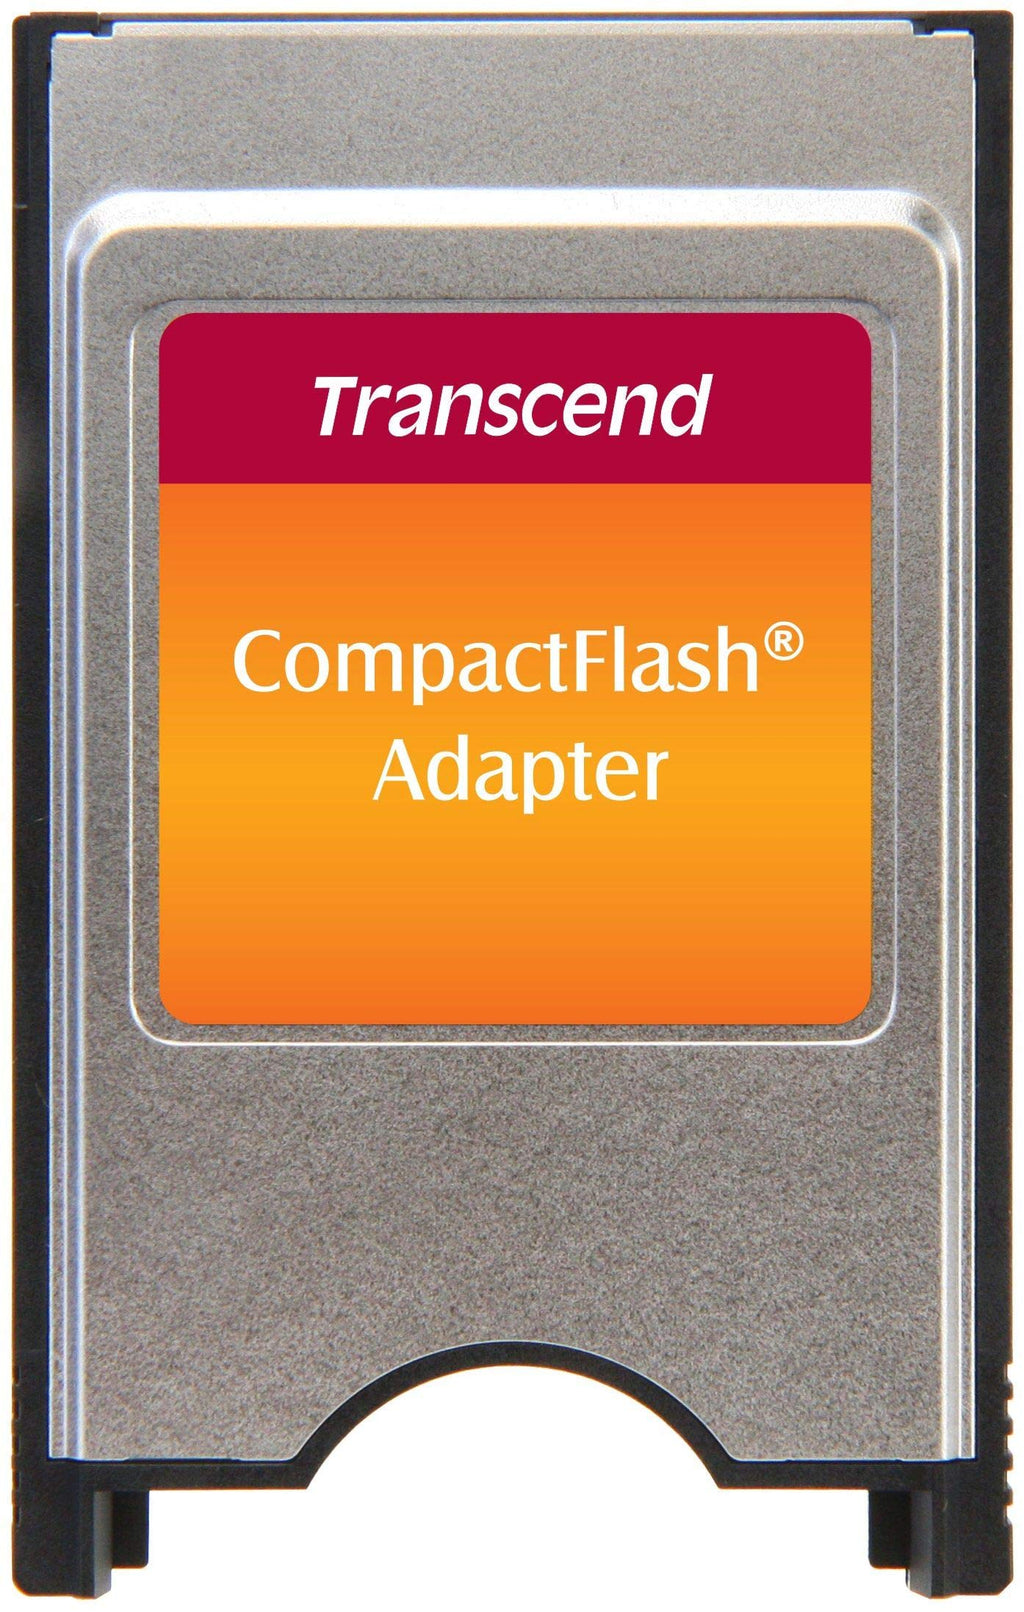 Transcend PCMCIA Ata Adapter for Cf 2 Card 1 Pack